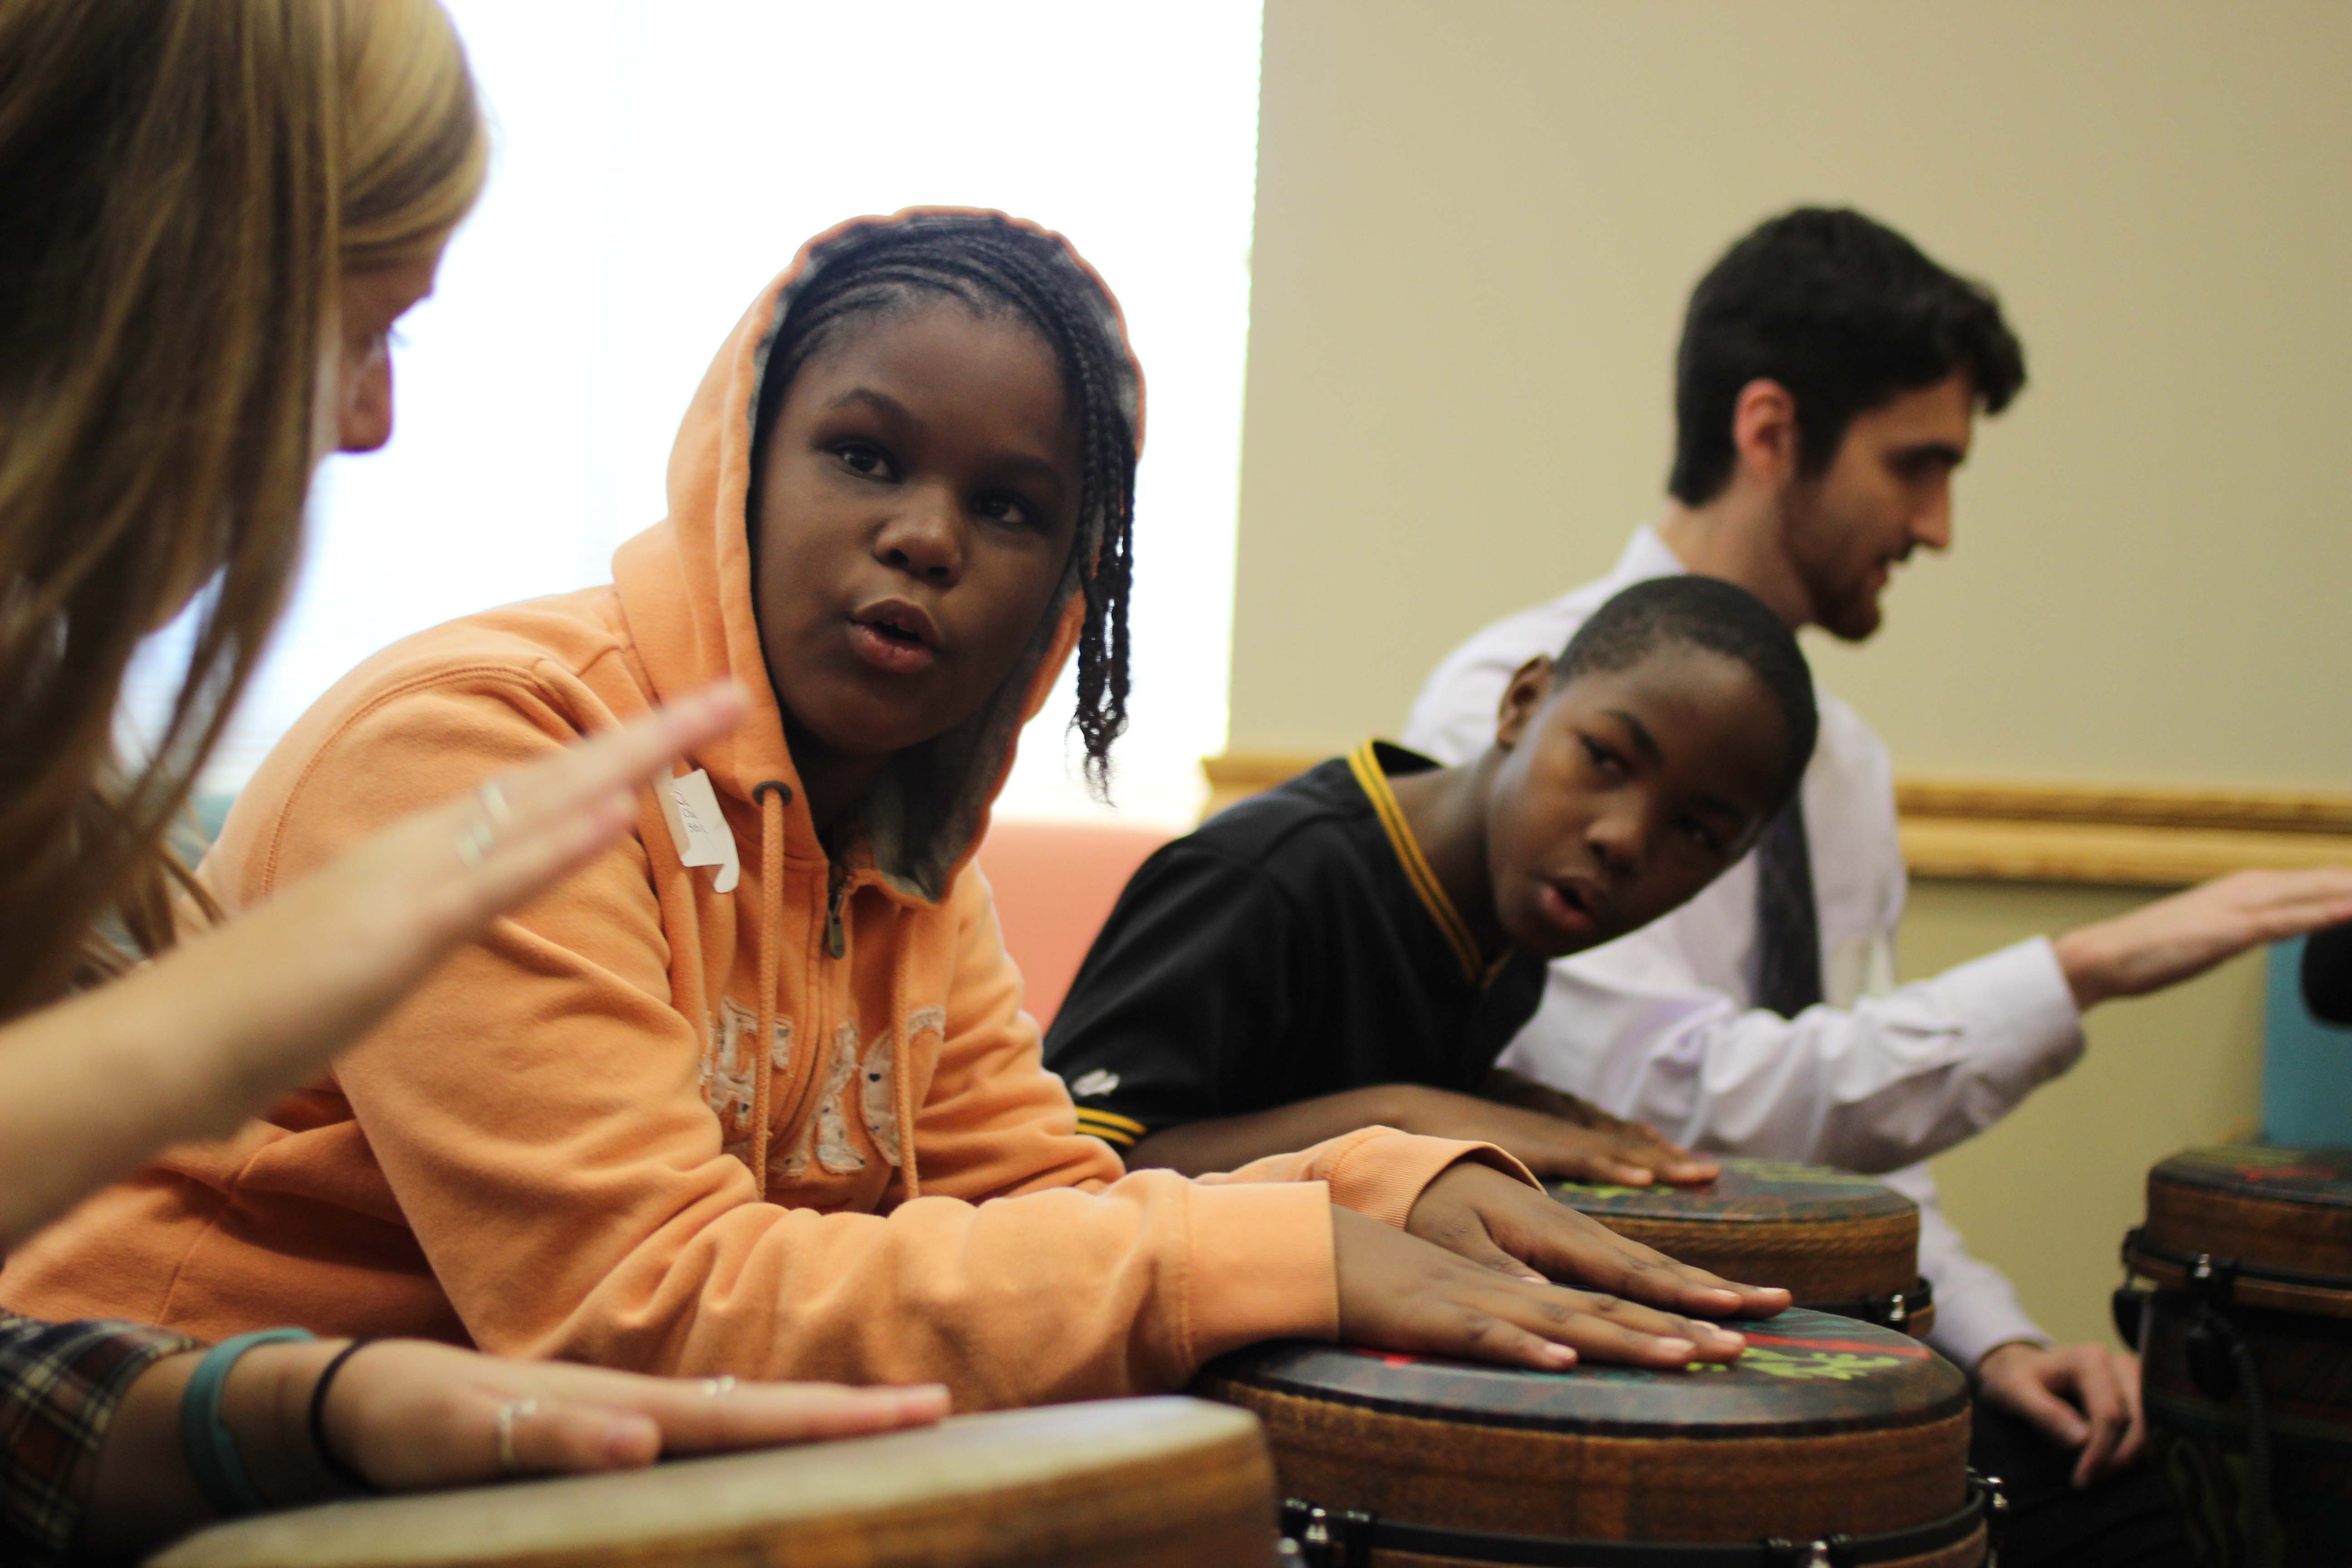 Two young children and two Lafayette students drum in class.